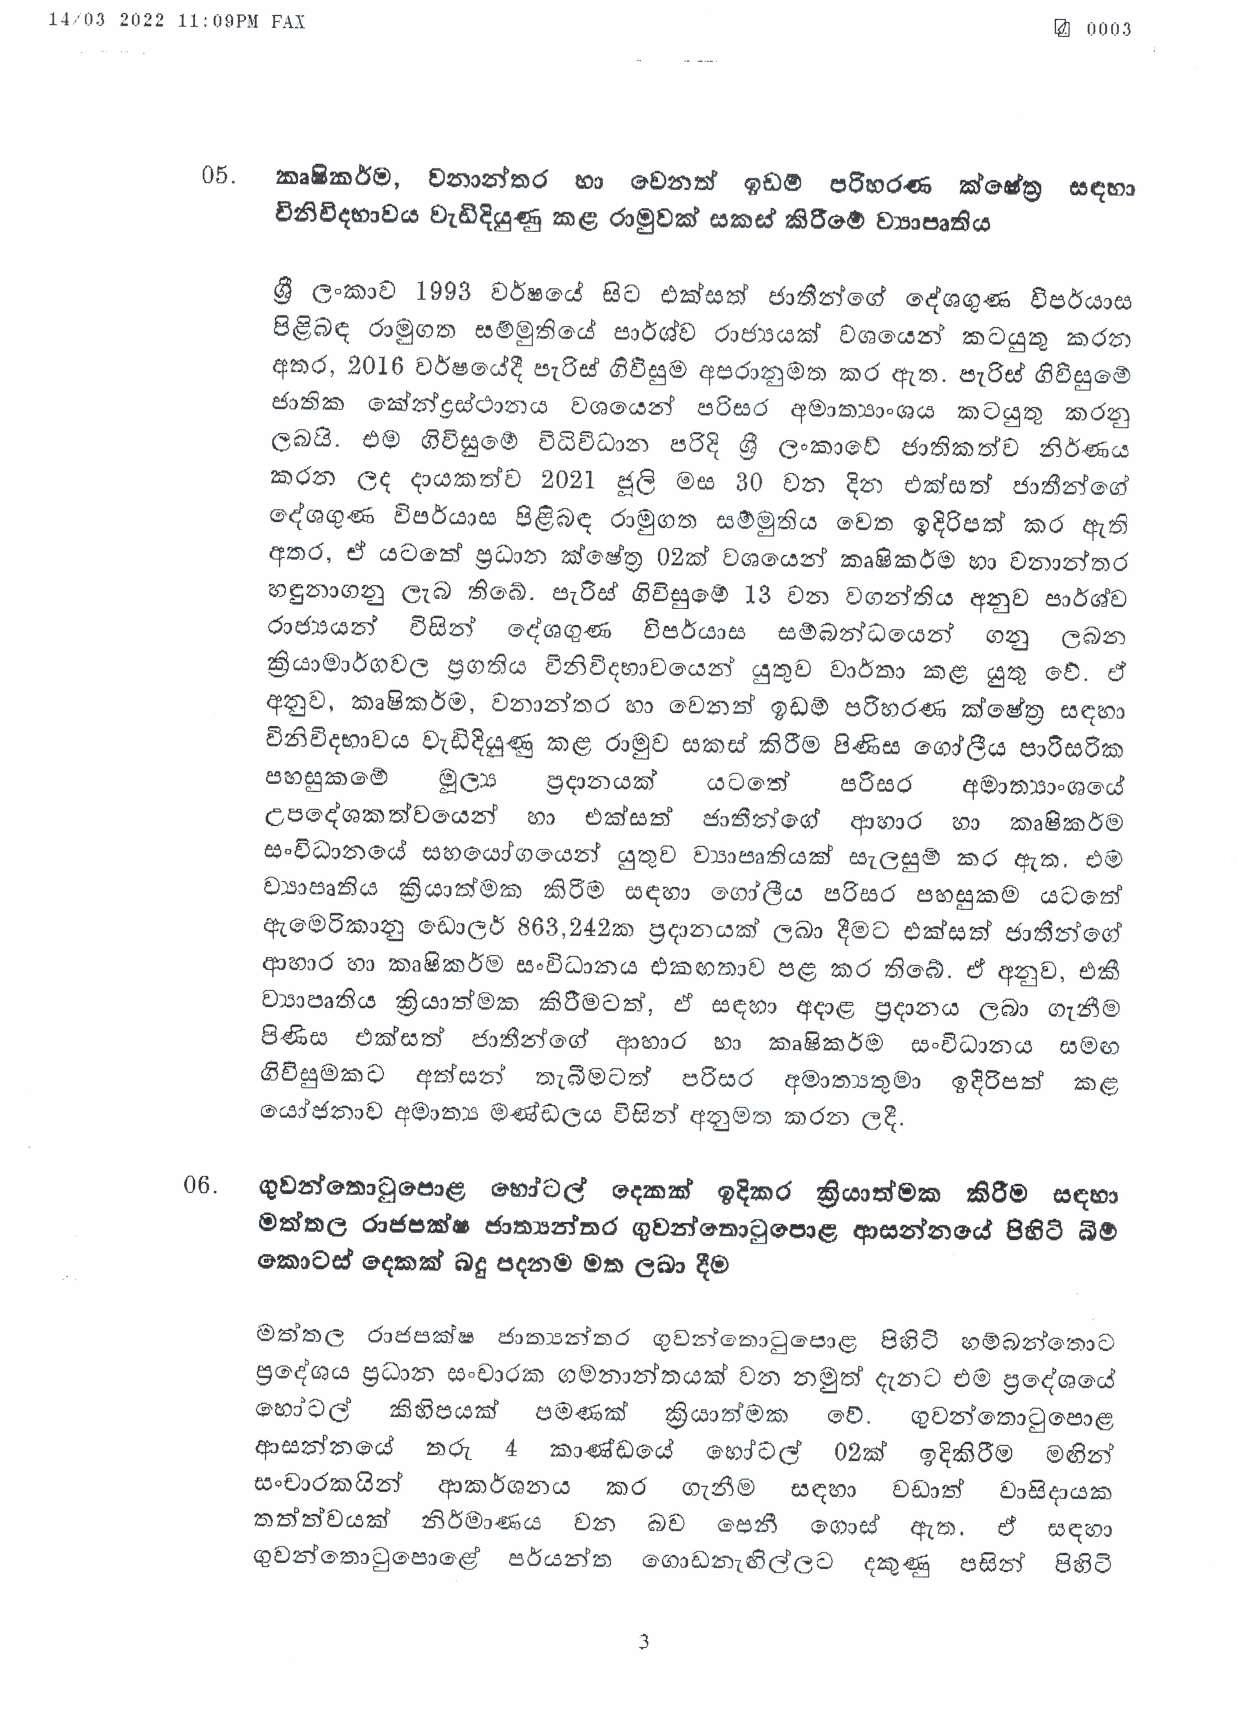 Cabinet Decision on 14.03.2022 page 003